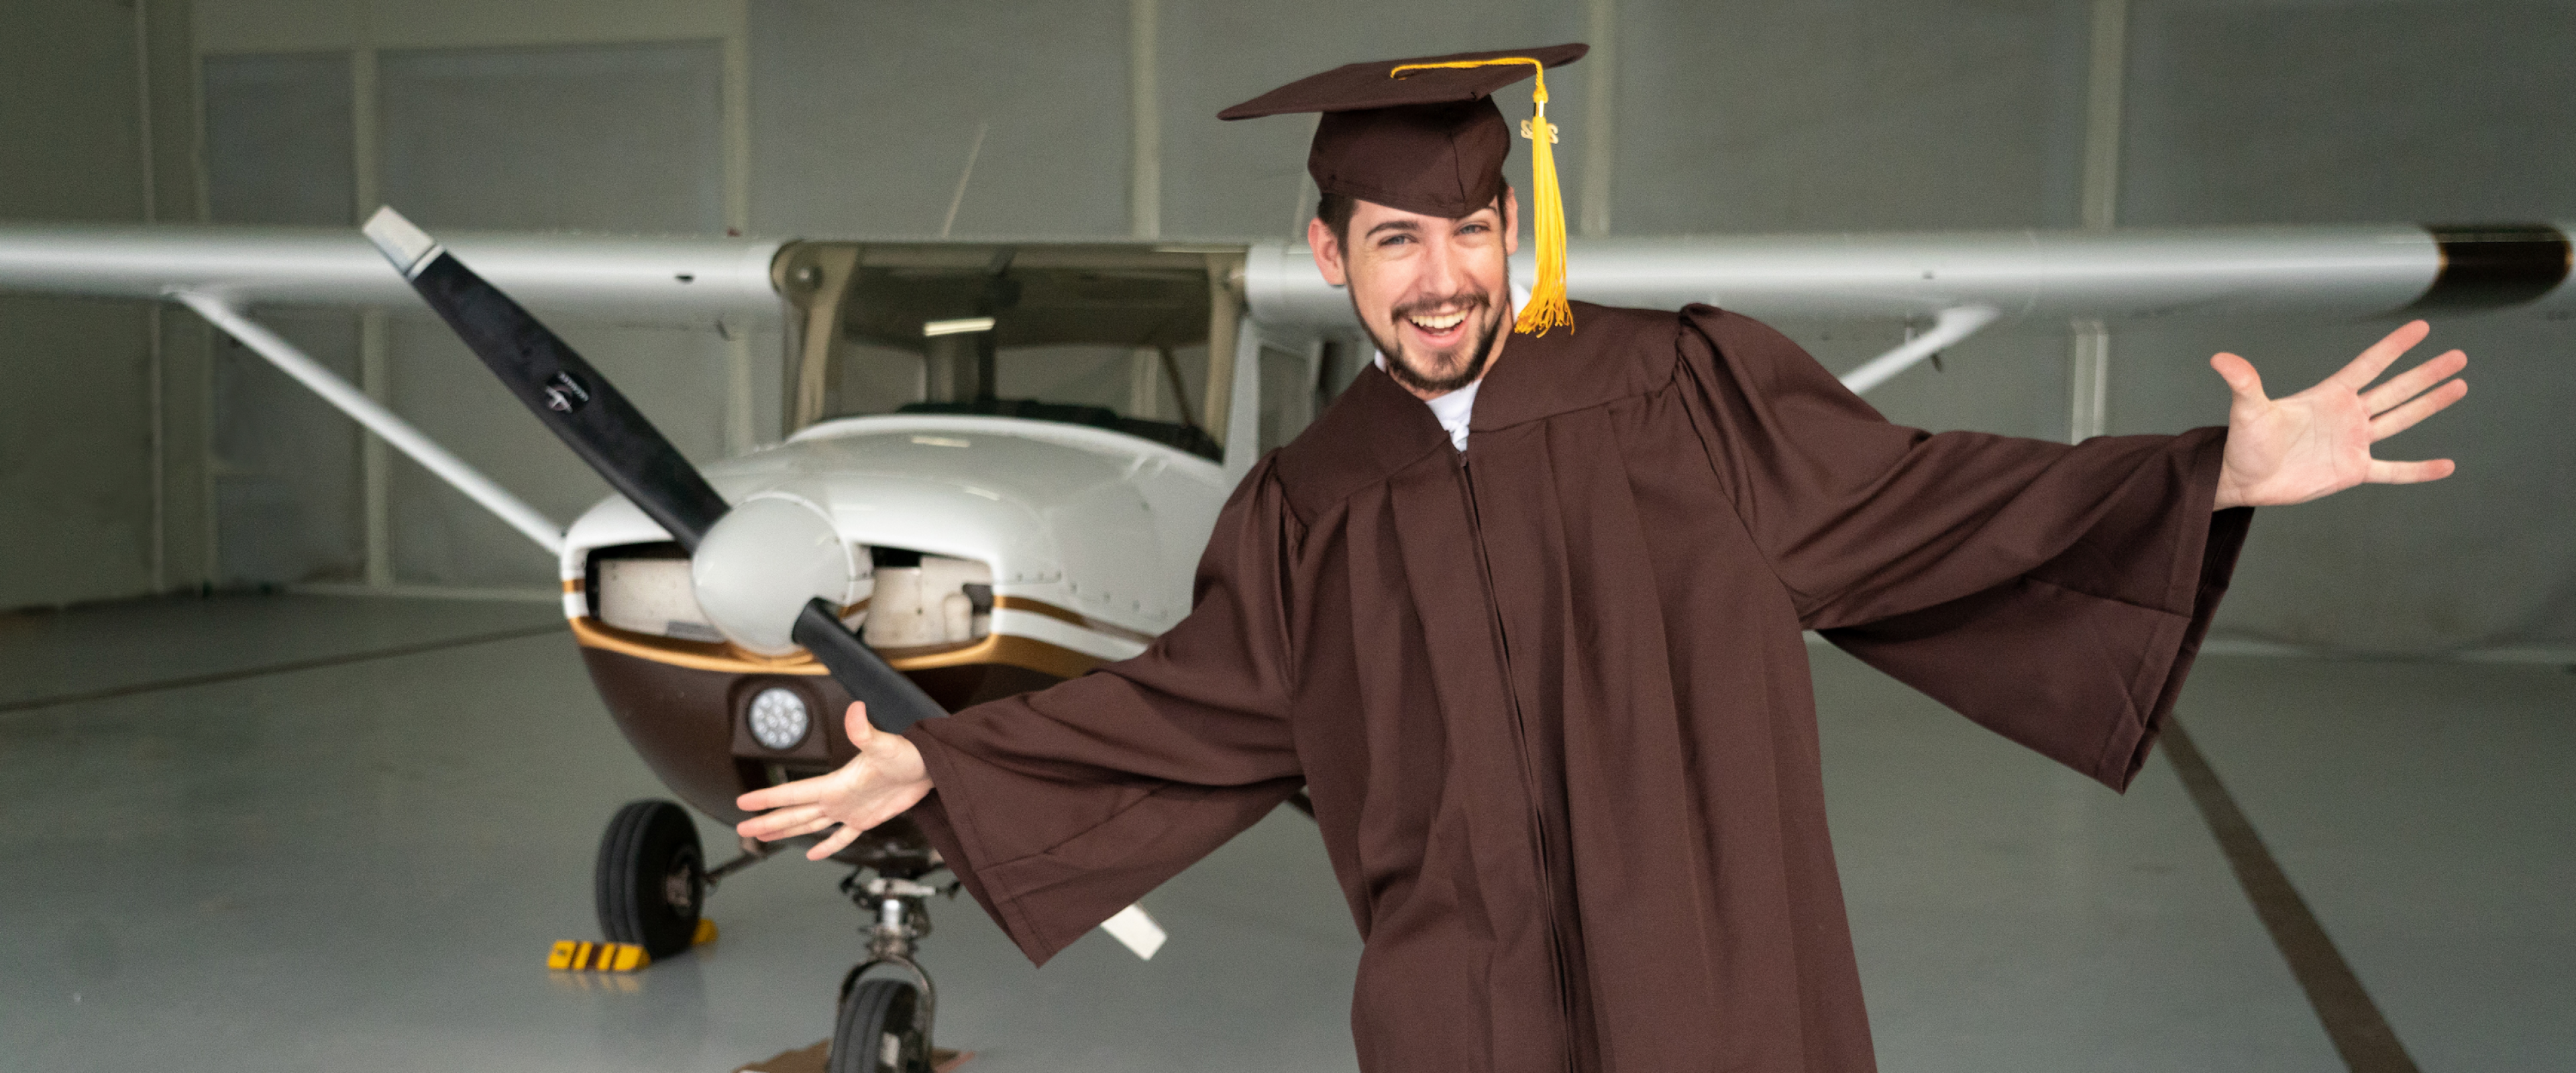 A portrait of Kyle Albrecht in his graduation attire standing in front of a plane.